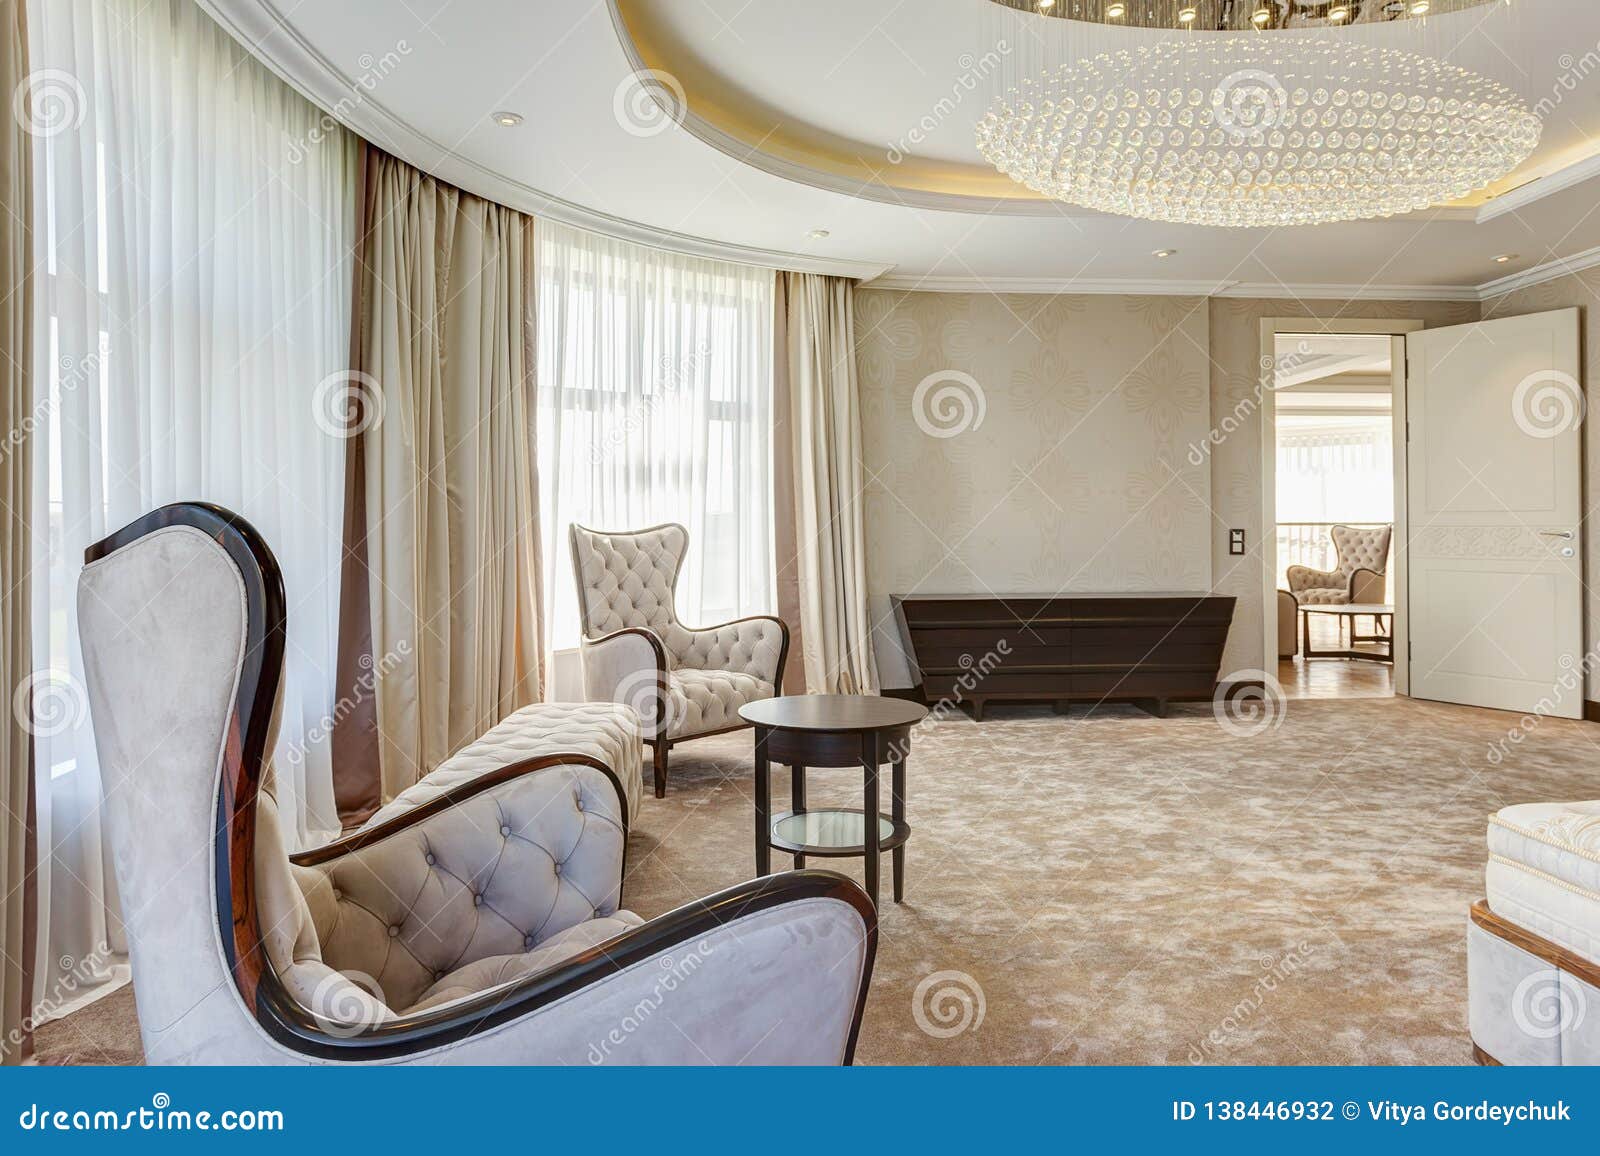 Interior Of Room In Beige And White Colors Stock Photo